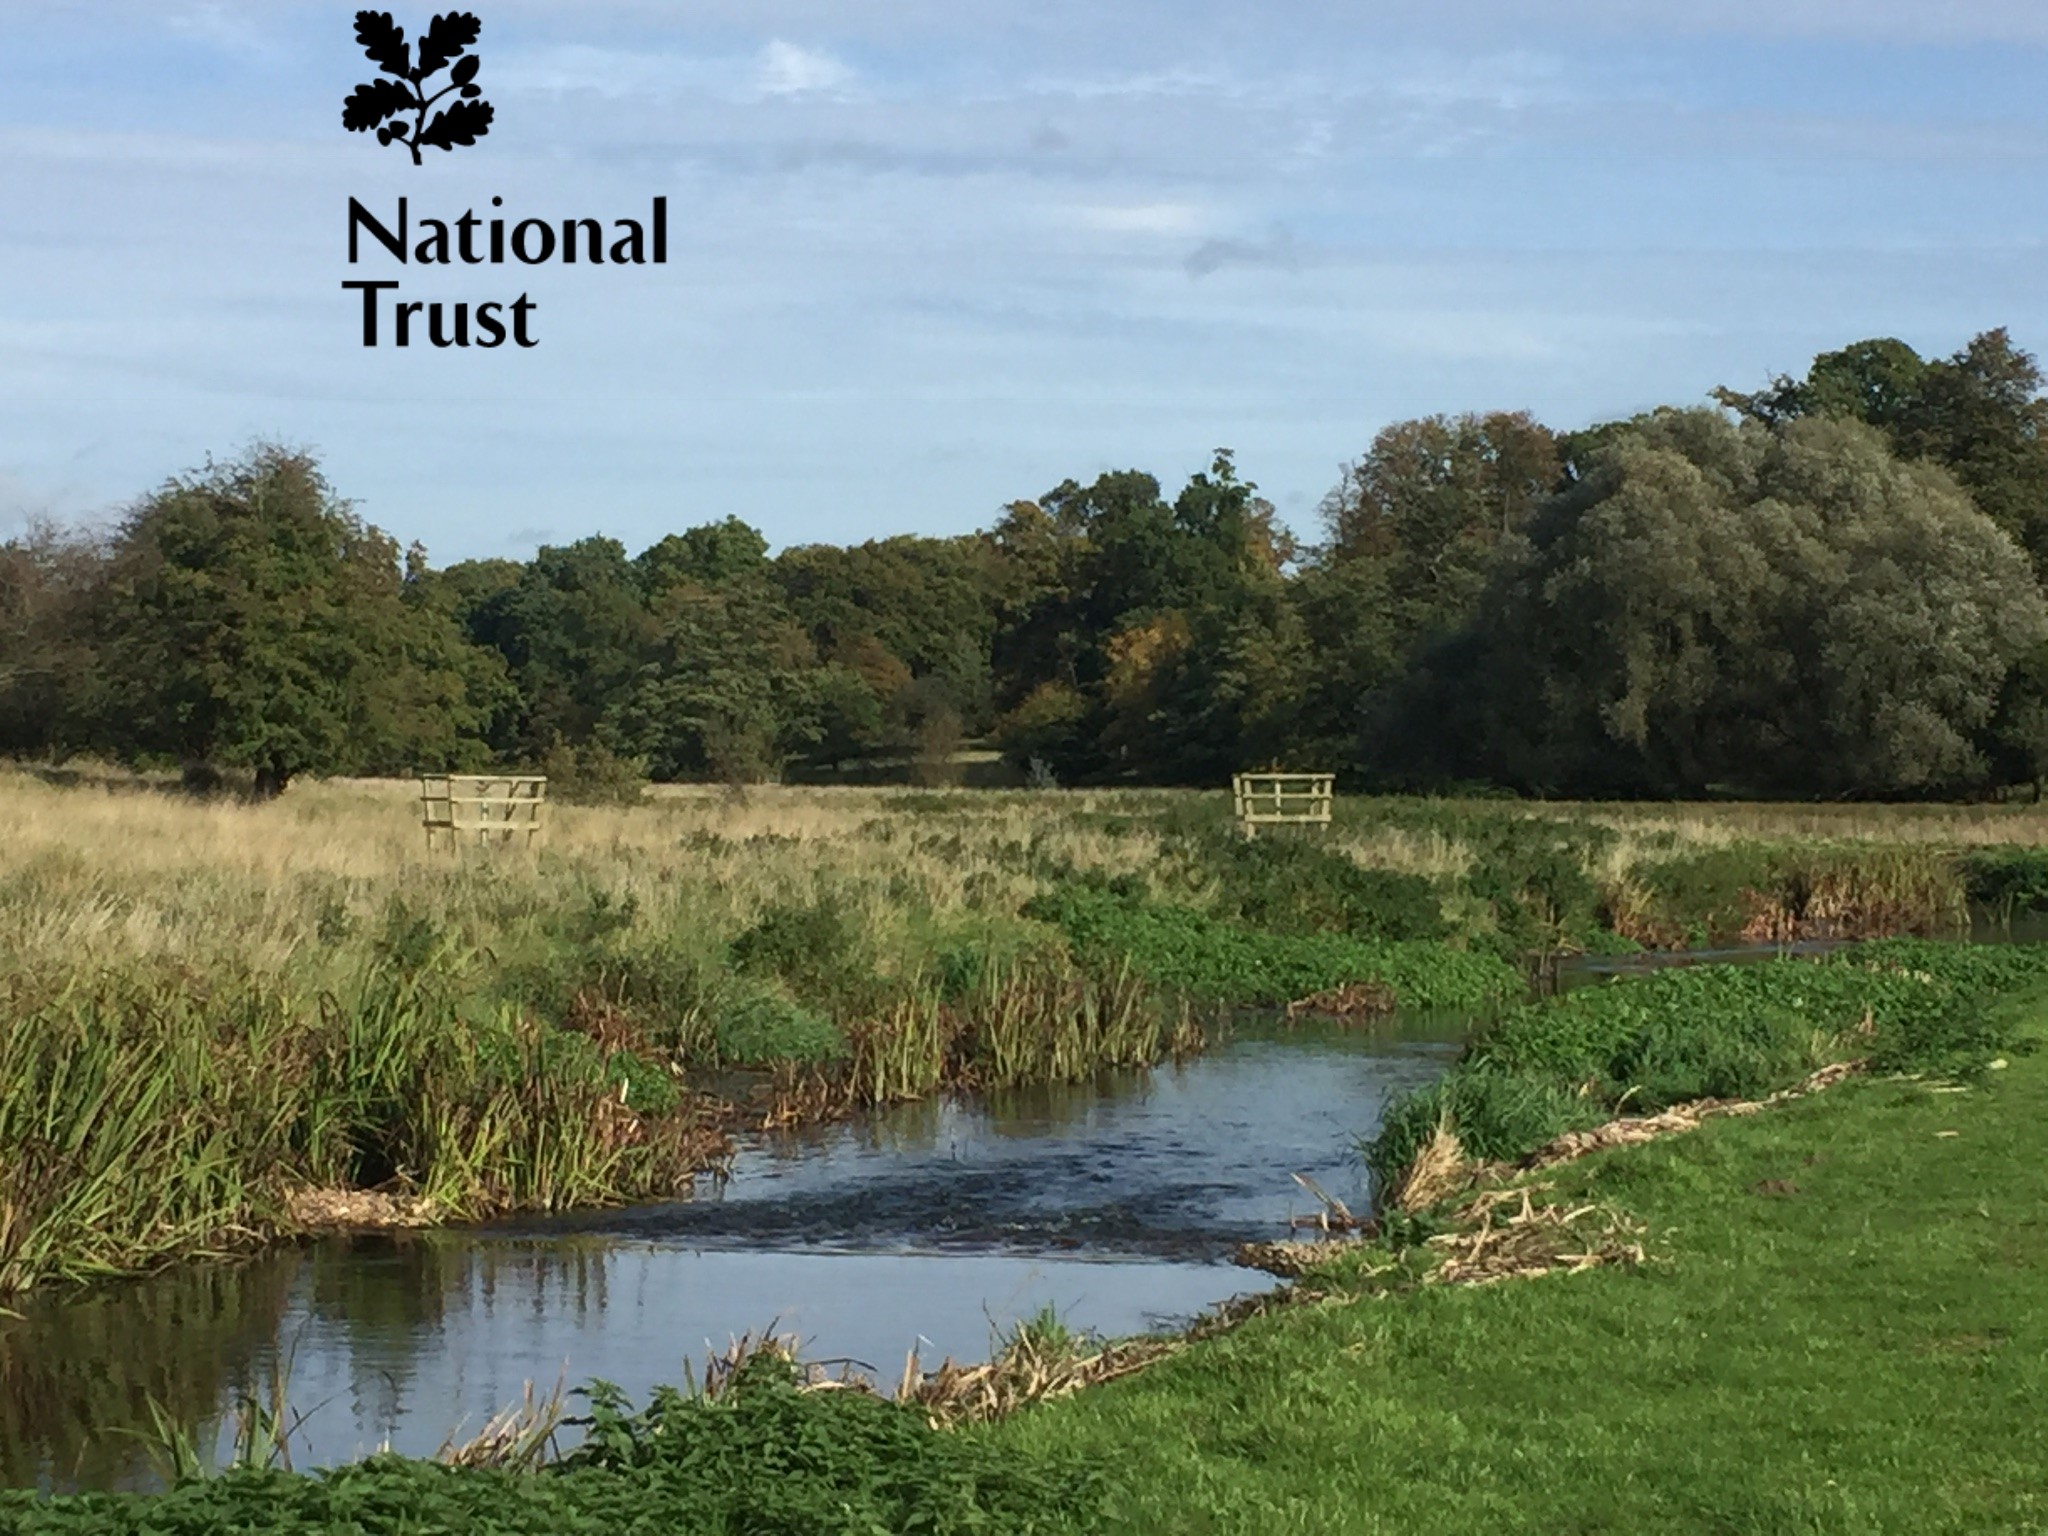 A Statement from our Funding Partner - National Trust